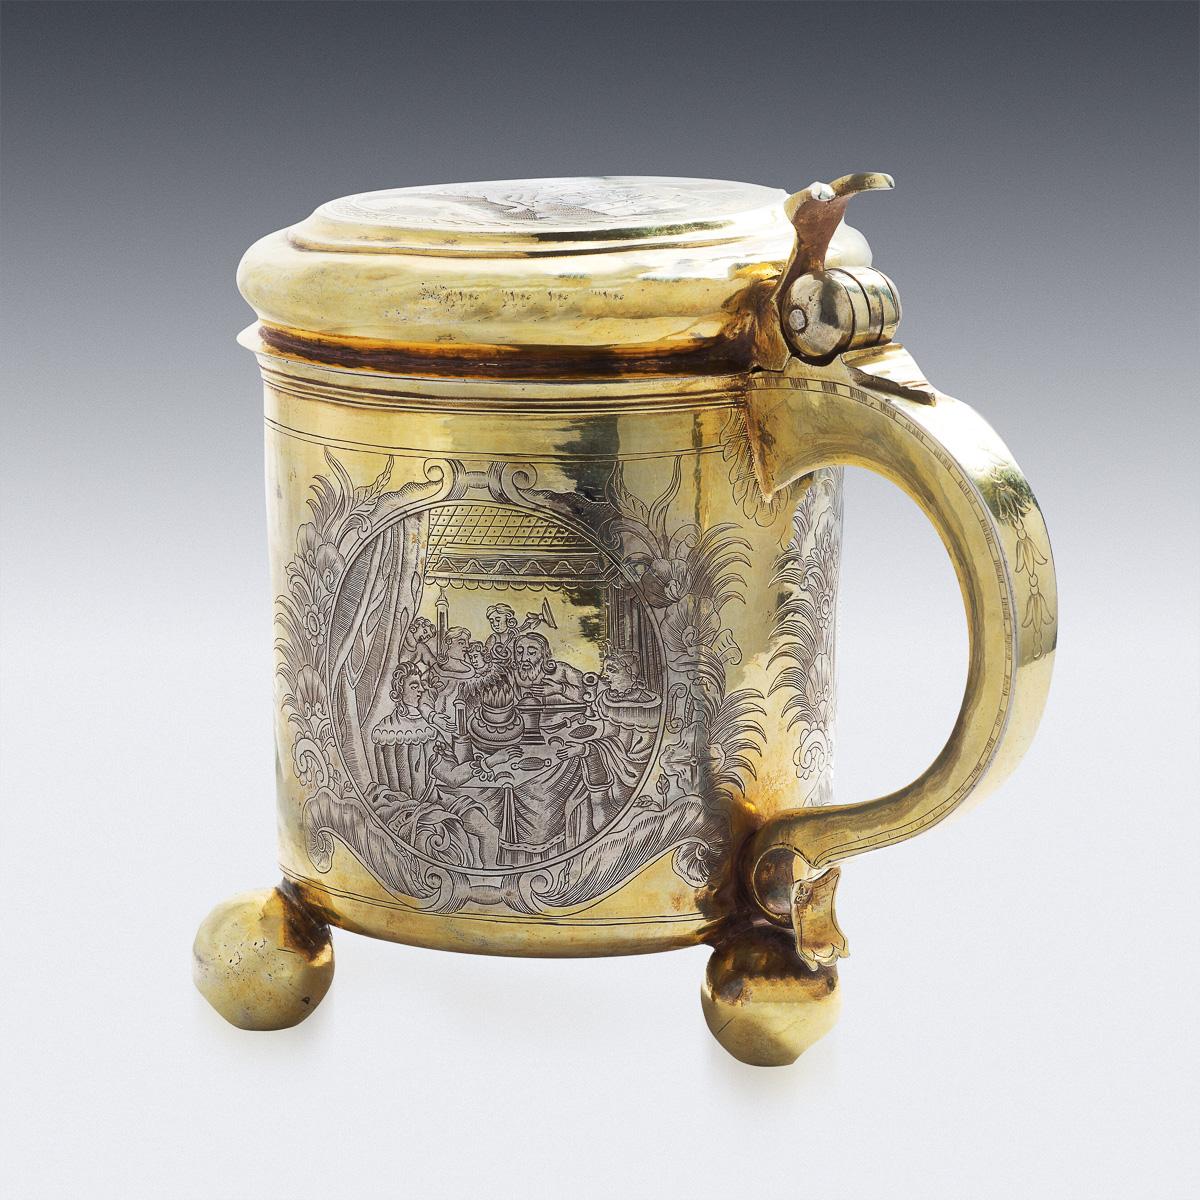 Antique mid-18th century Imperial Russian solid silver impressive lidded tankard, parcel gilt, of cylindrical form, on three ball feet, the body and hinged cover with four cartouches engraved with scene of Samson and Delilah: the body depicting